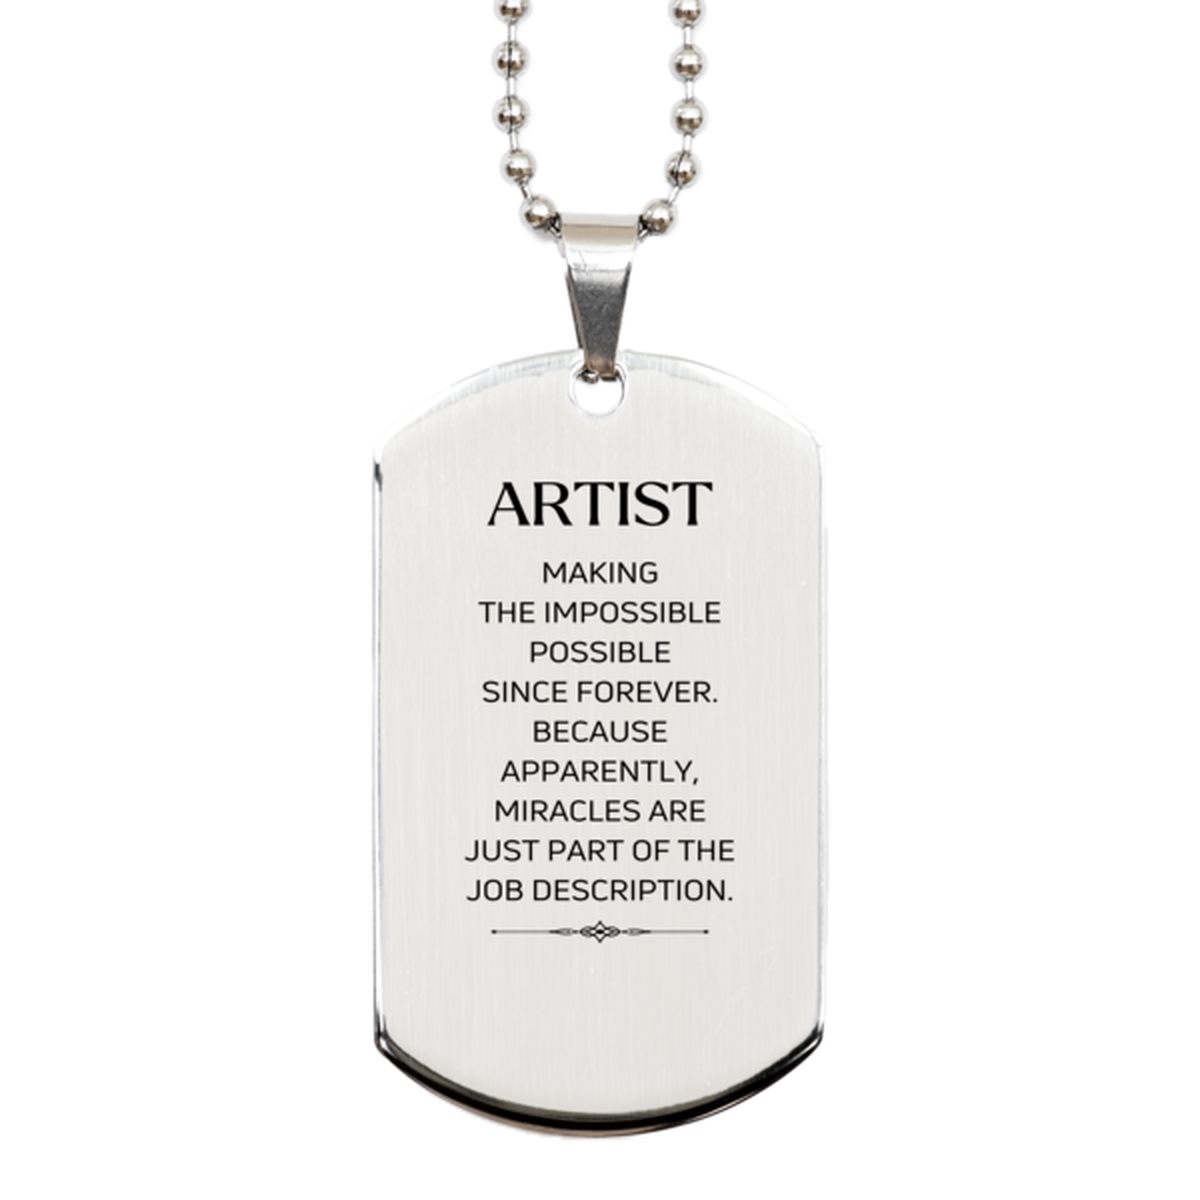 Funny Artist Gifts, Miracles are just part of the job description, Inspirational Birthday Silver Dog Tag For Artist, Men, Women, Coworkers, Friends, Boss